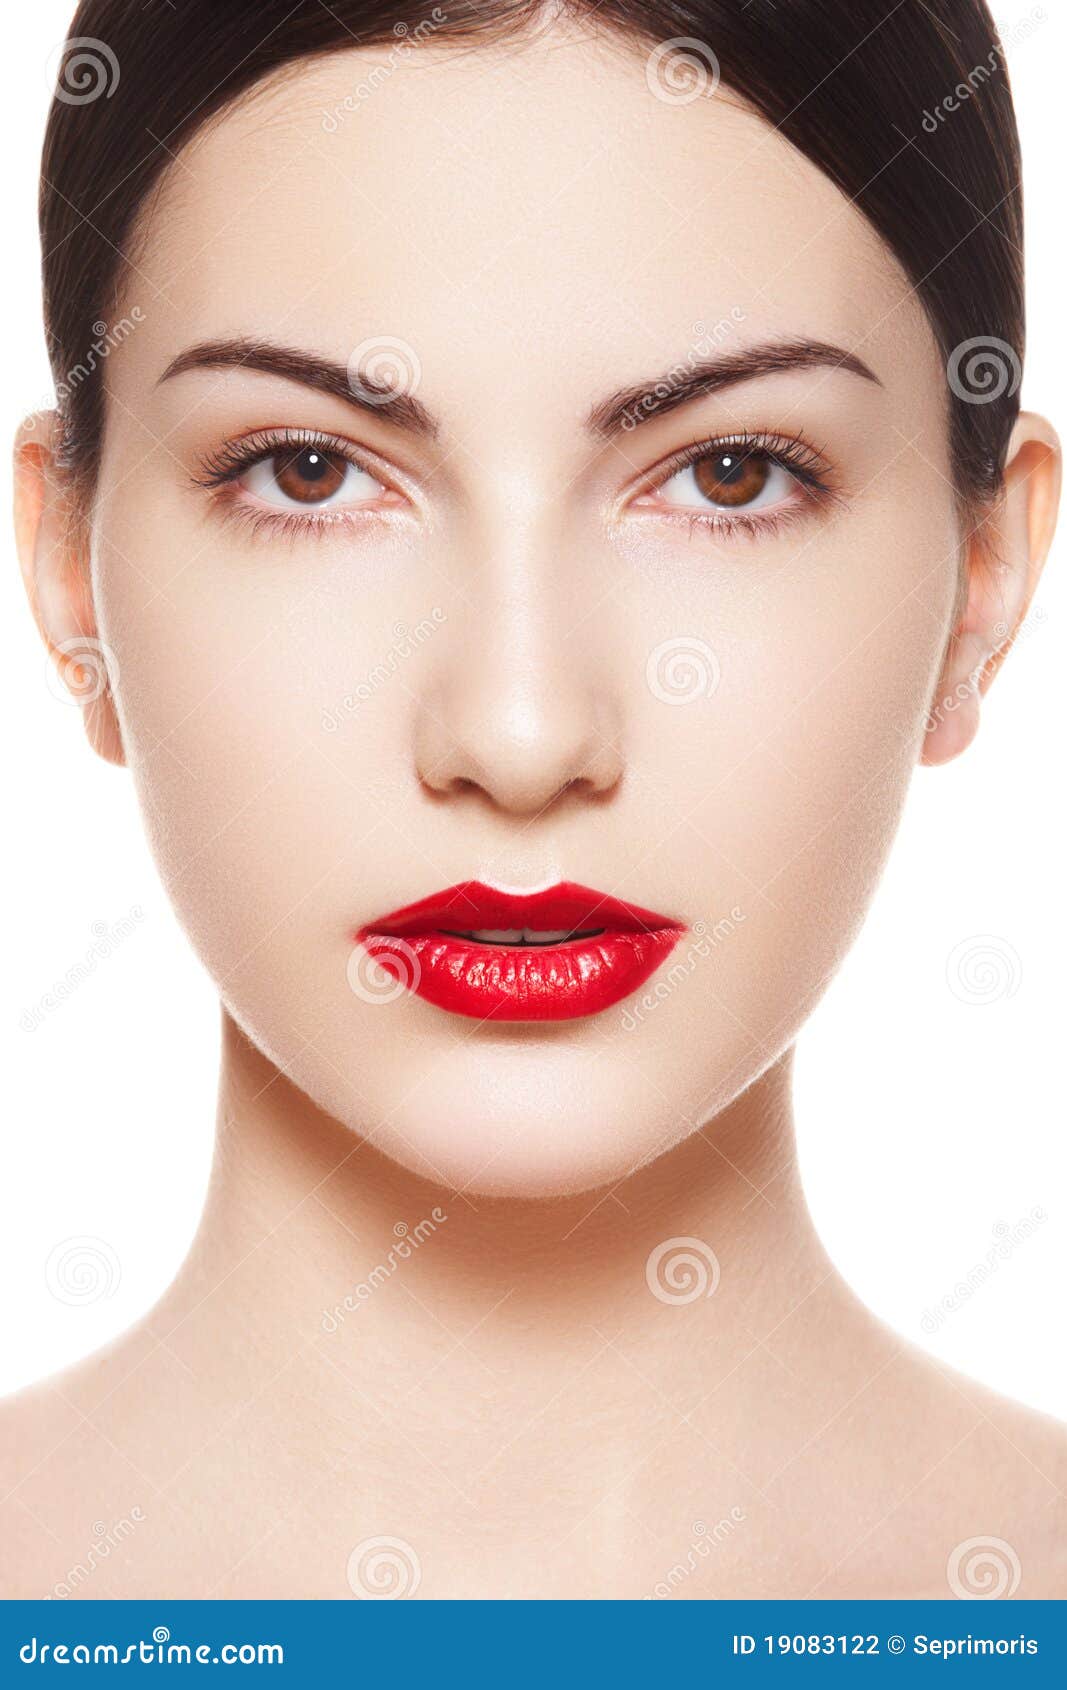 spanish woman purity face with bright lips make-up